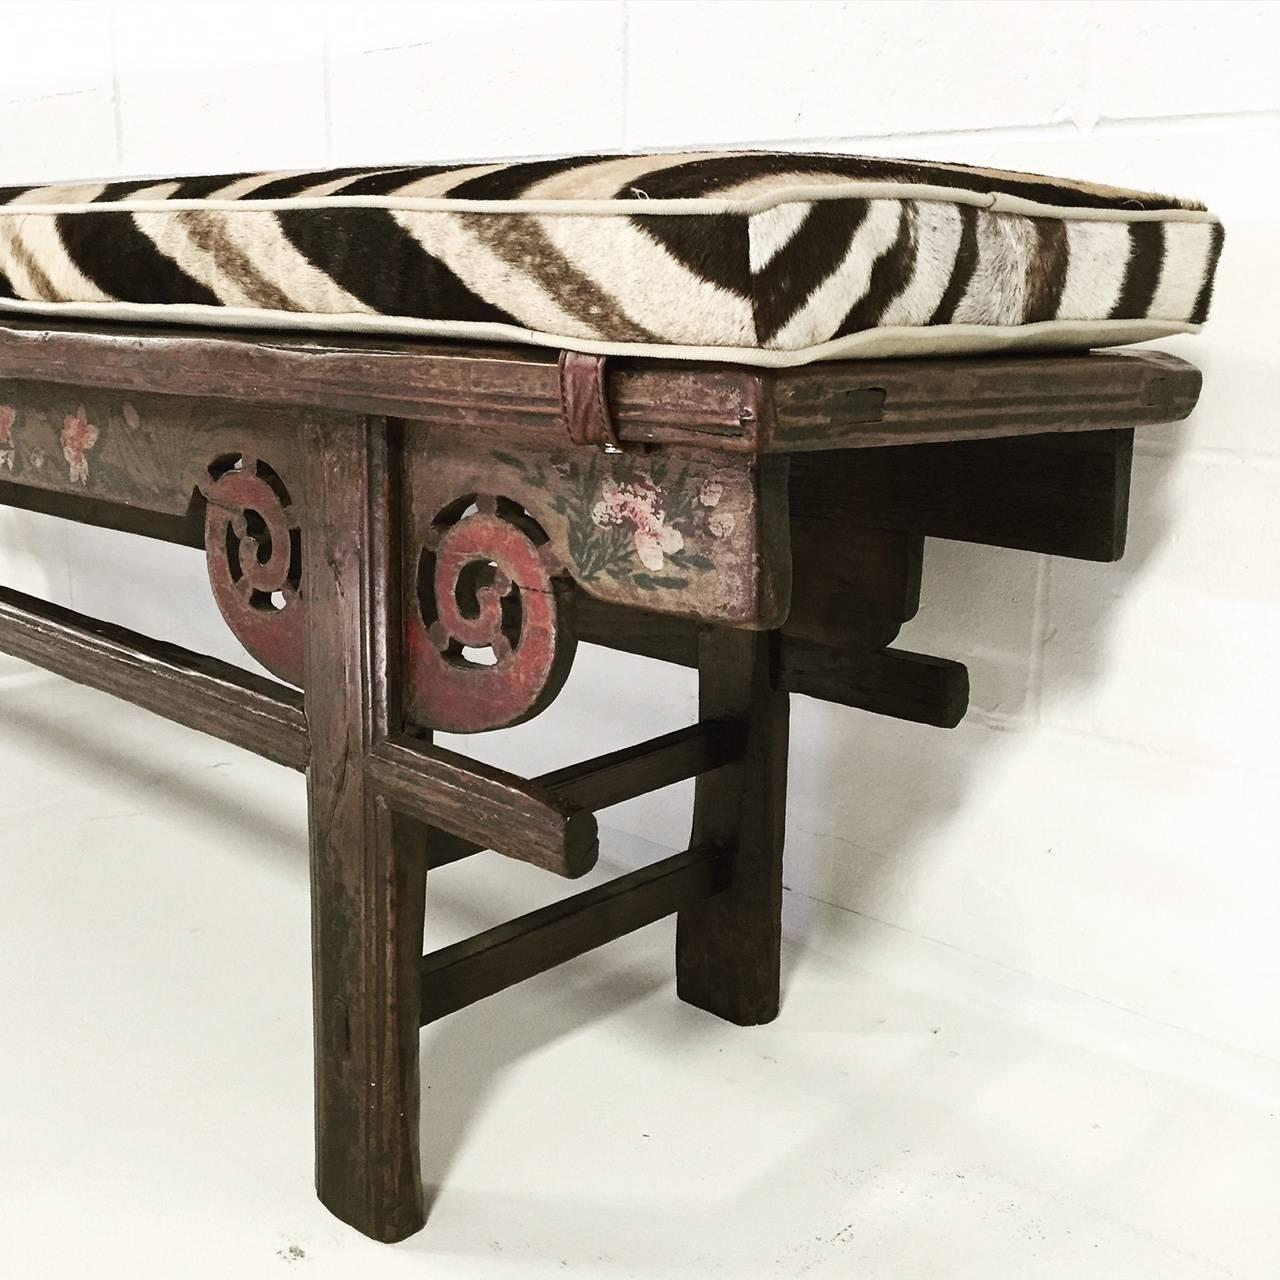 We fell in love with collecting these vintage and antique Chinese benches because they are so versatile. We can picture them in a million different interiors, a million styles. This 90 year old elmwood bench from the Shandong province has traces of